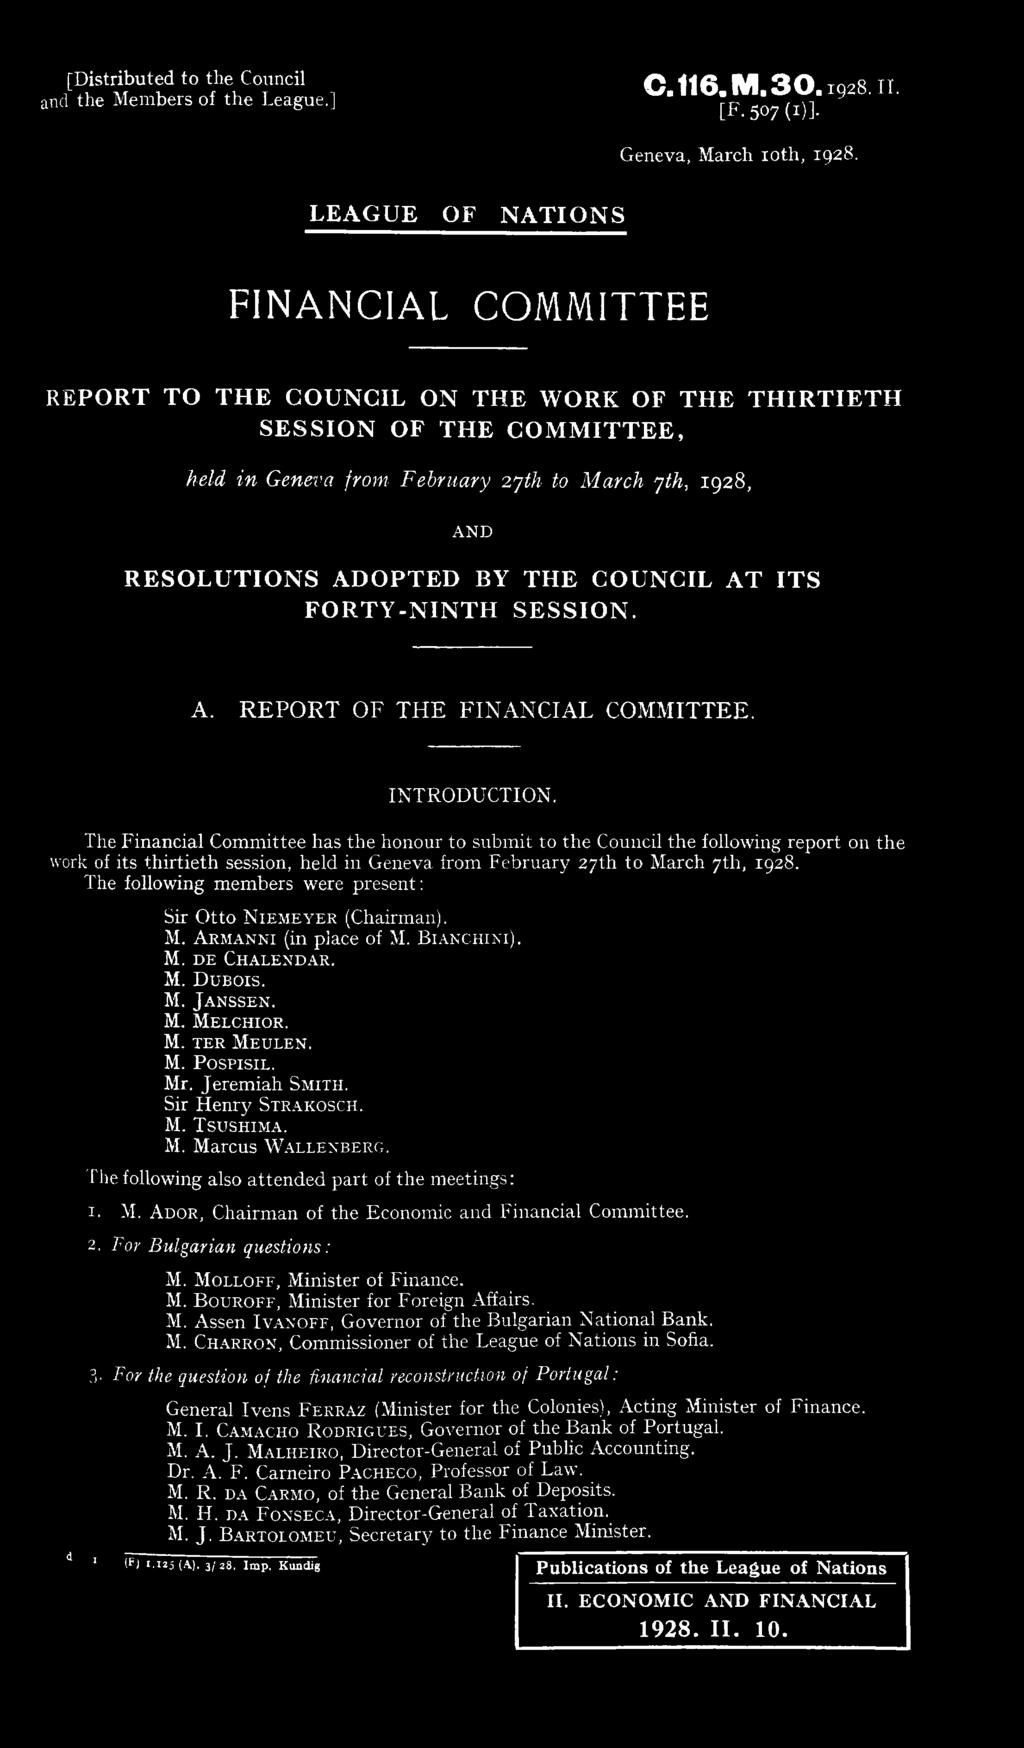 COUNCIL AT ITS FORTY-NINTH SESSION. A. R E P O R T OF TH E FINANCIAL COMMITTEE. IN TRO D U CTIO N.